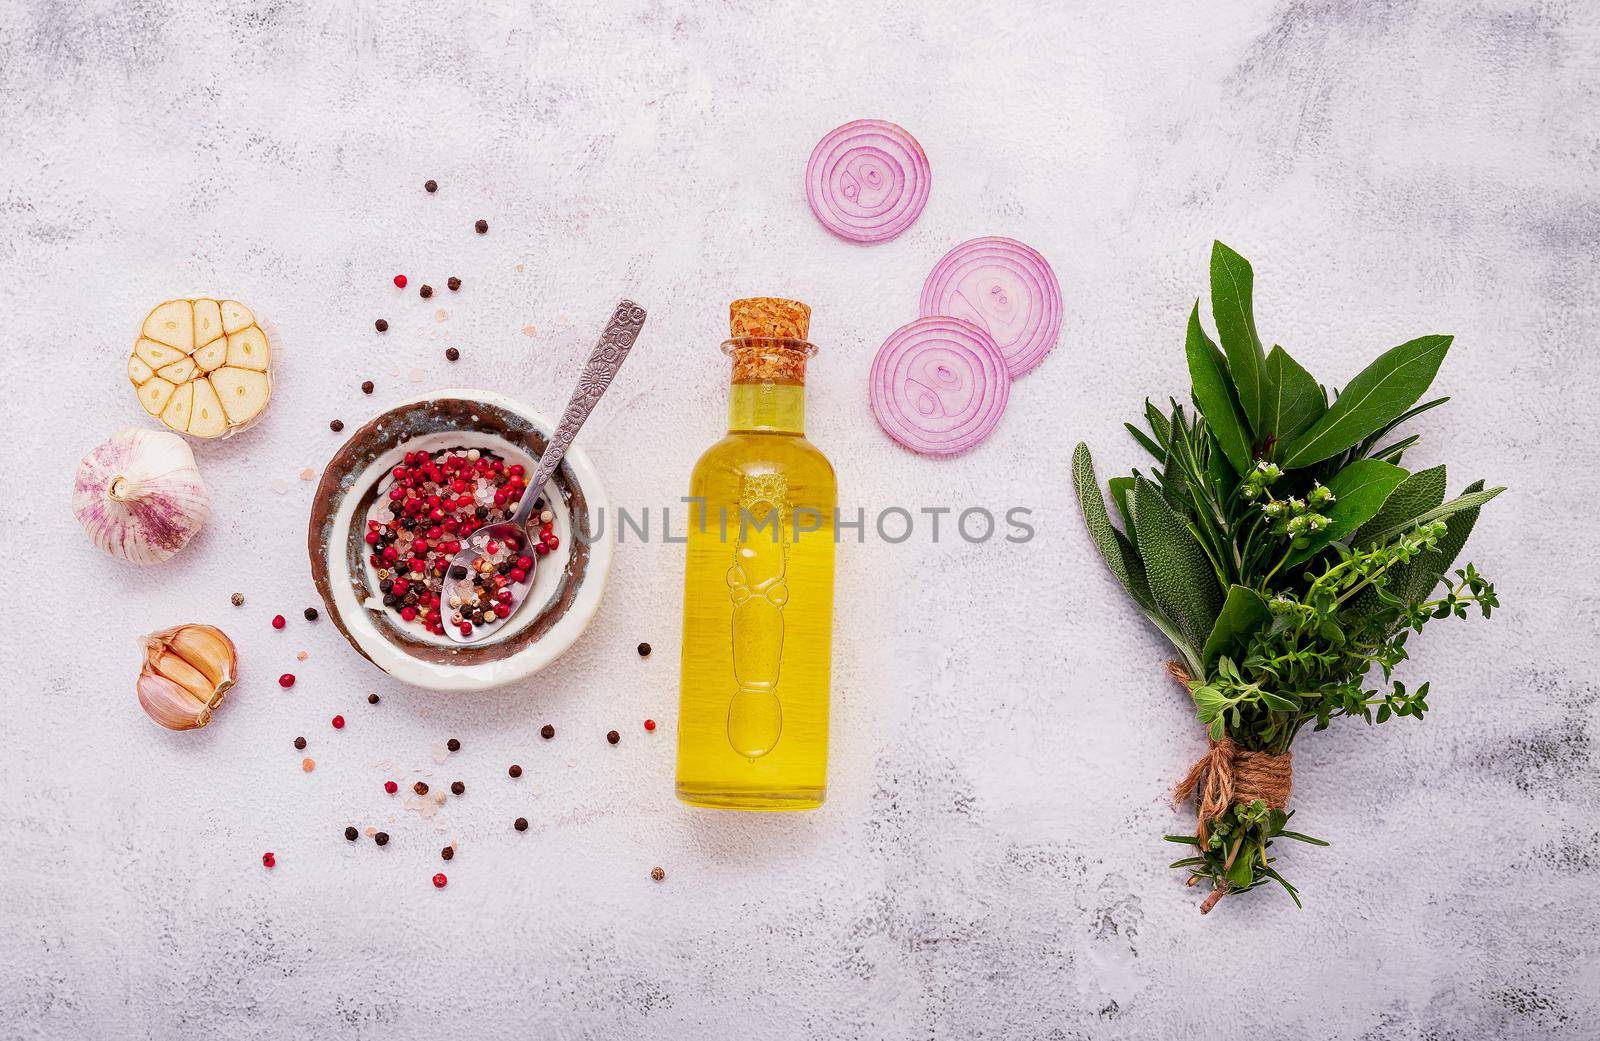 Ingredients for steak seasoning in ceramic bowl set up on white concrete background with copy space. by kerdkanno